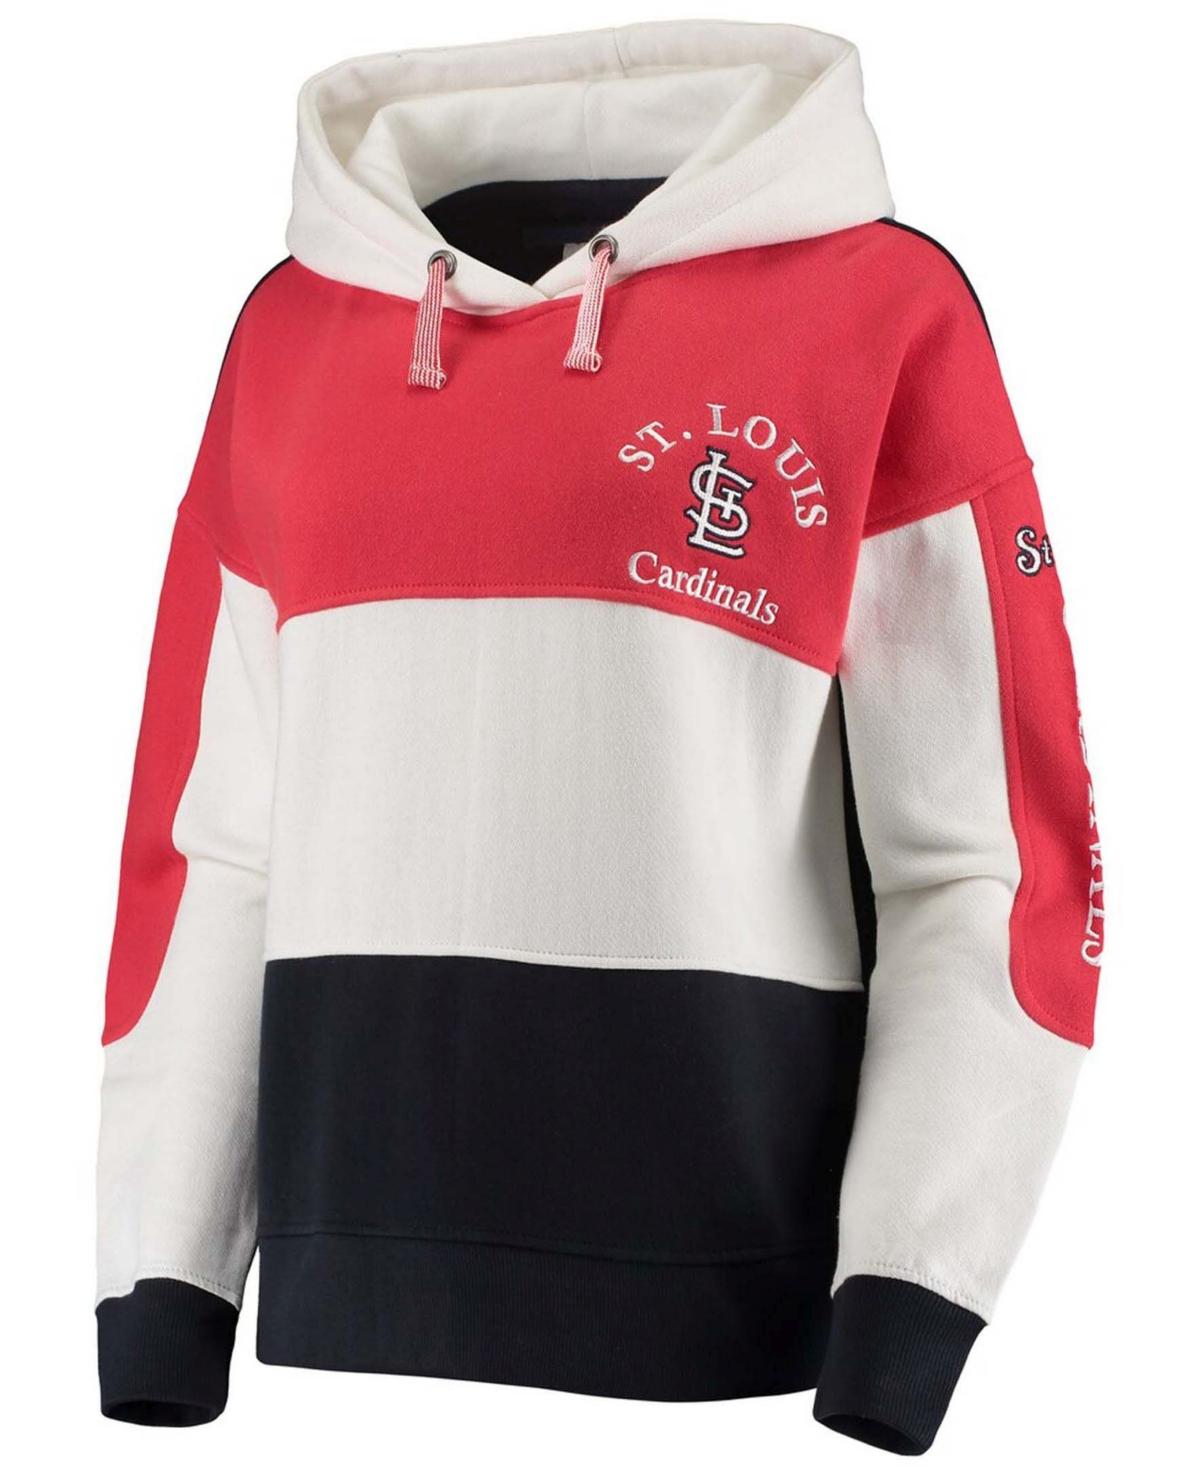 St. Louis Cardinals Women's Plus Size Colorblock Pullover Hoodie - Red